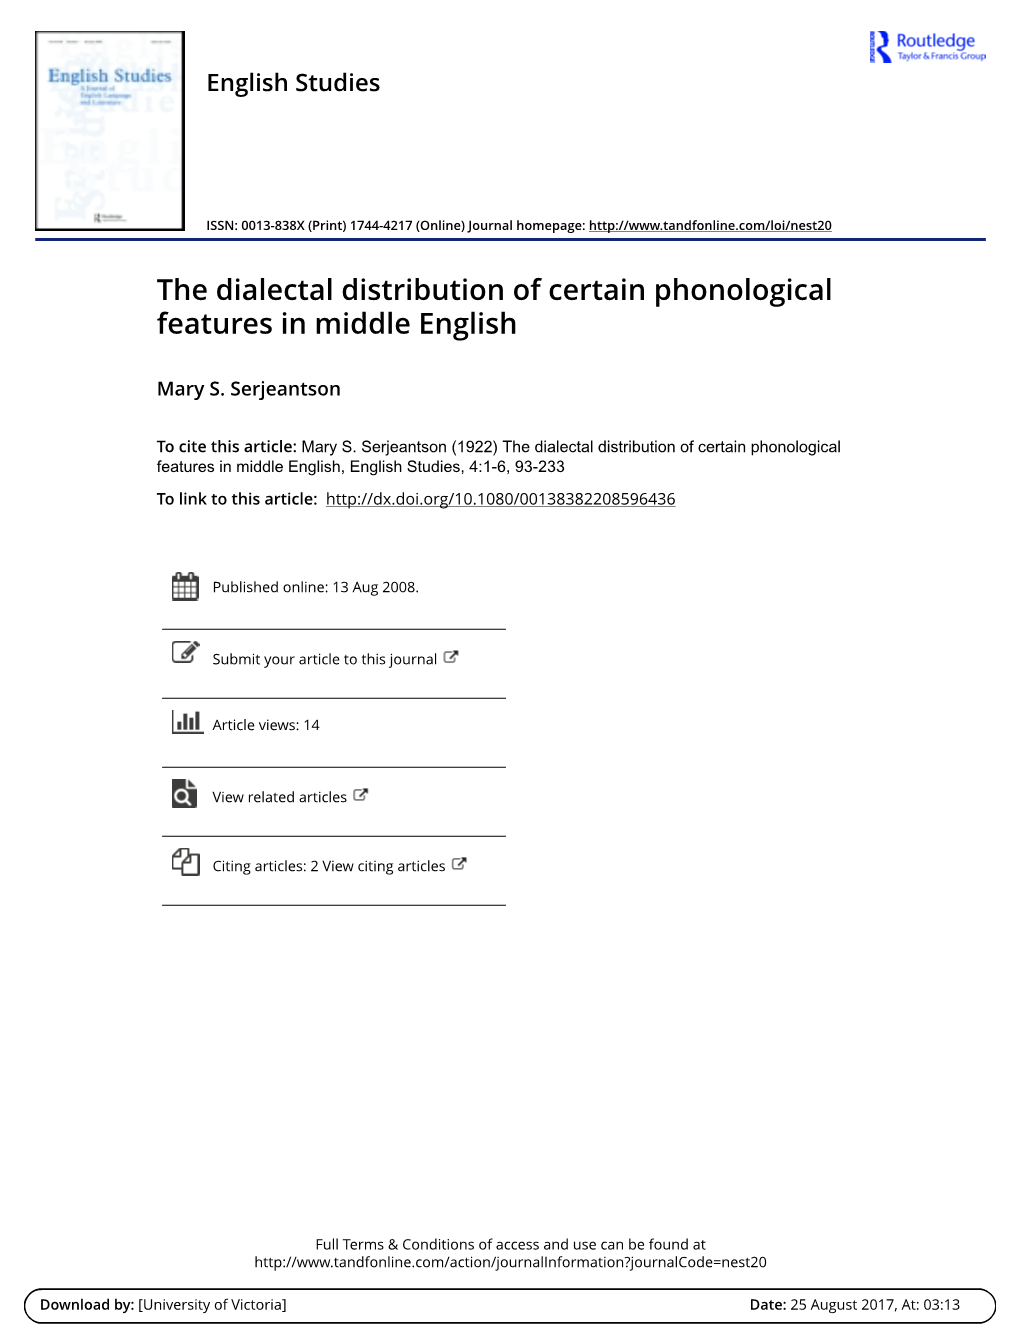 The Dialectal Distribution of Certain Phonological Features in Middle English